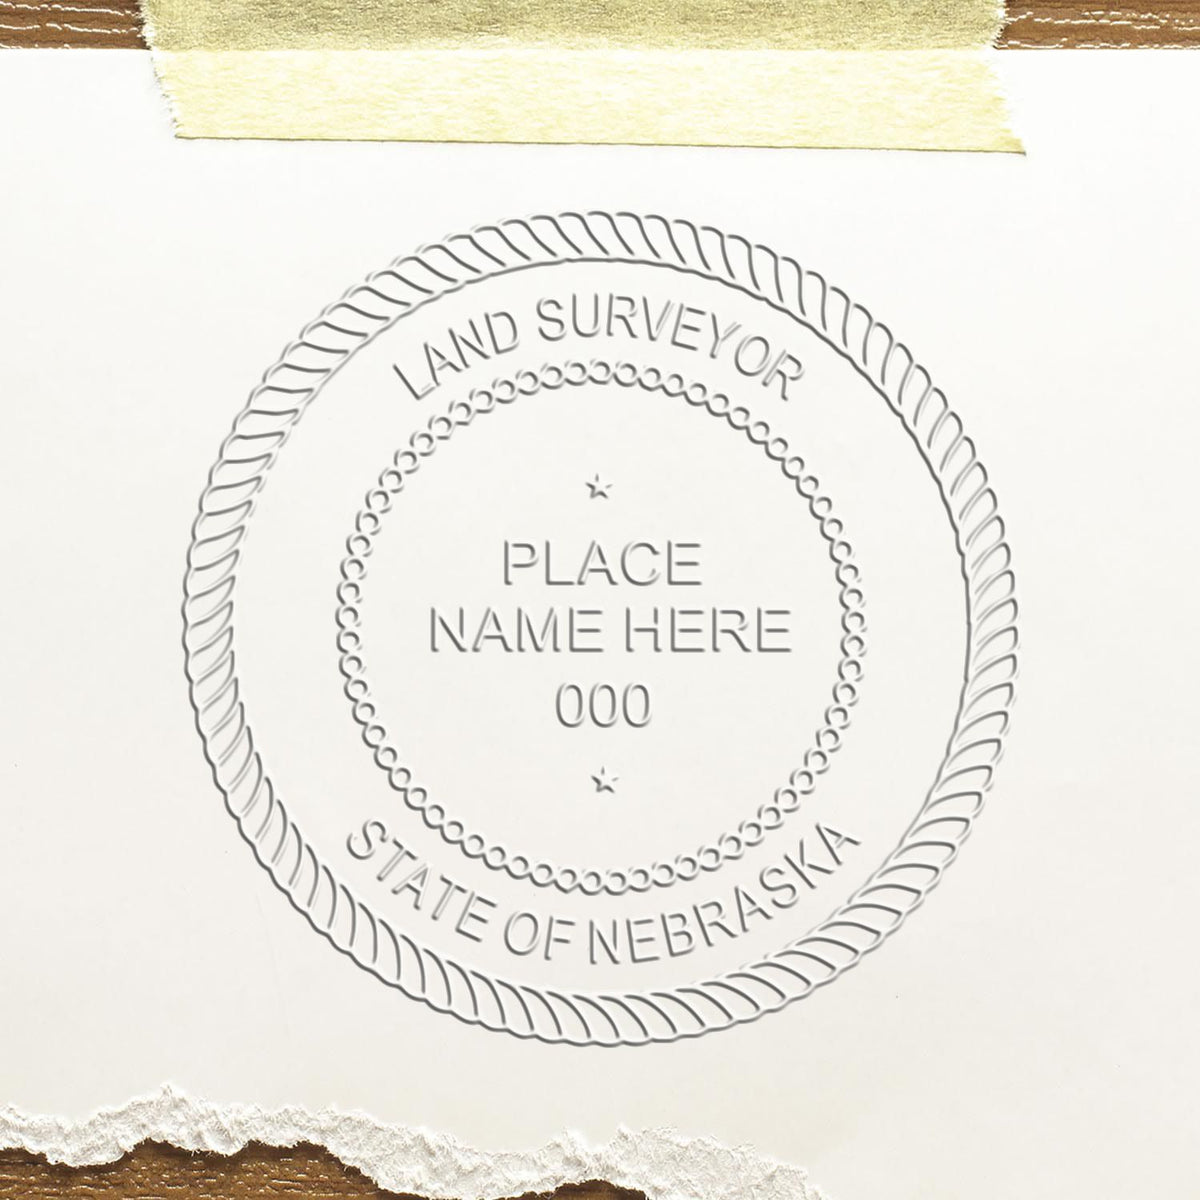 A lifestyle photo showing a stamped image of the Handheld Nebraska Land Surveyor Seal on a piece of paper